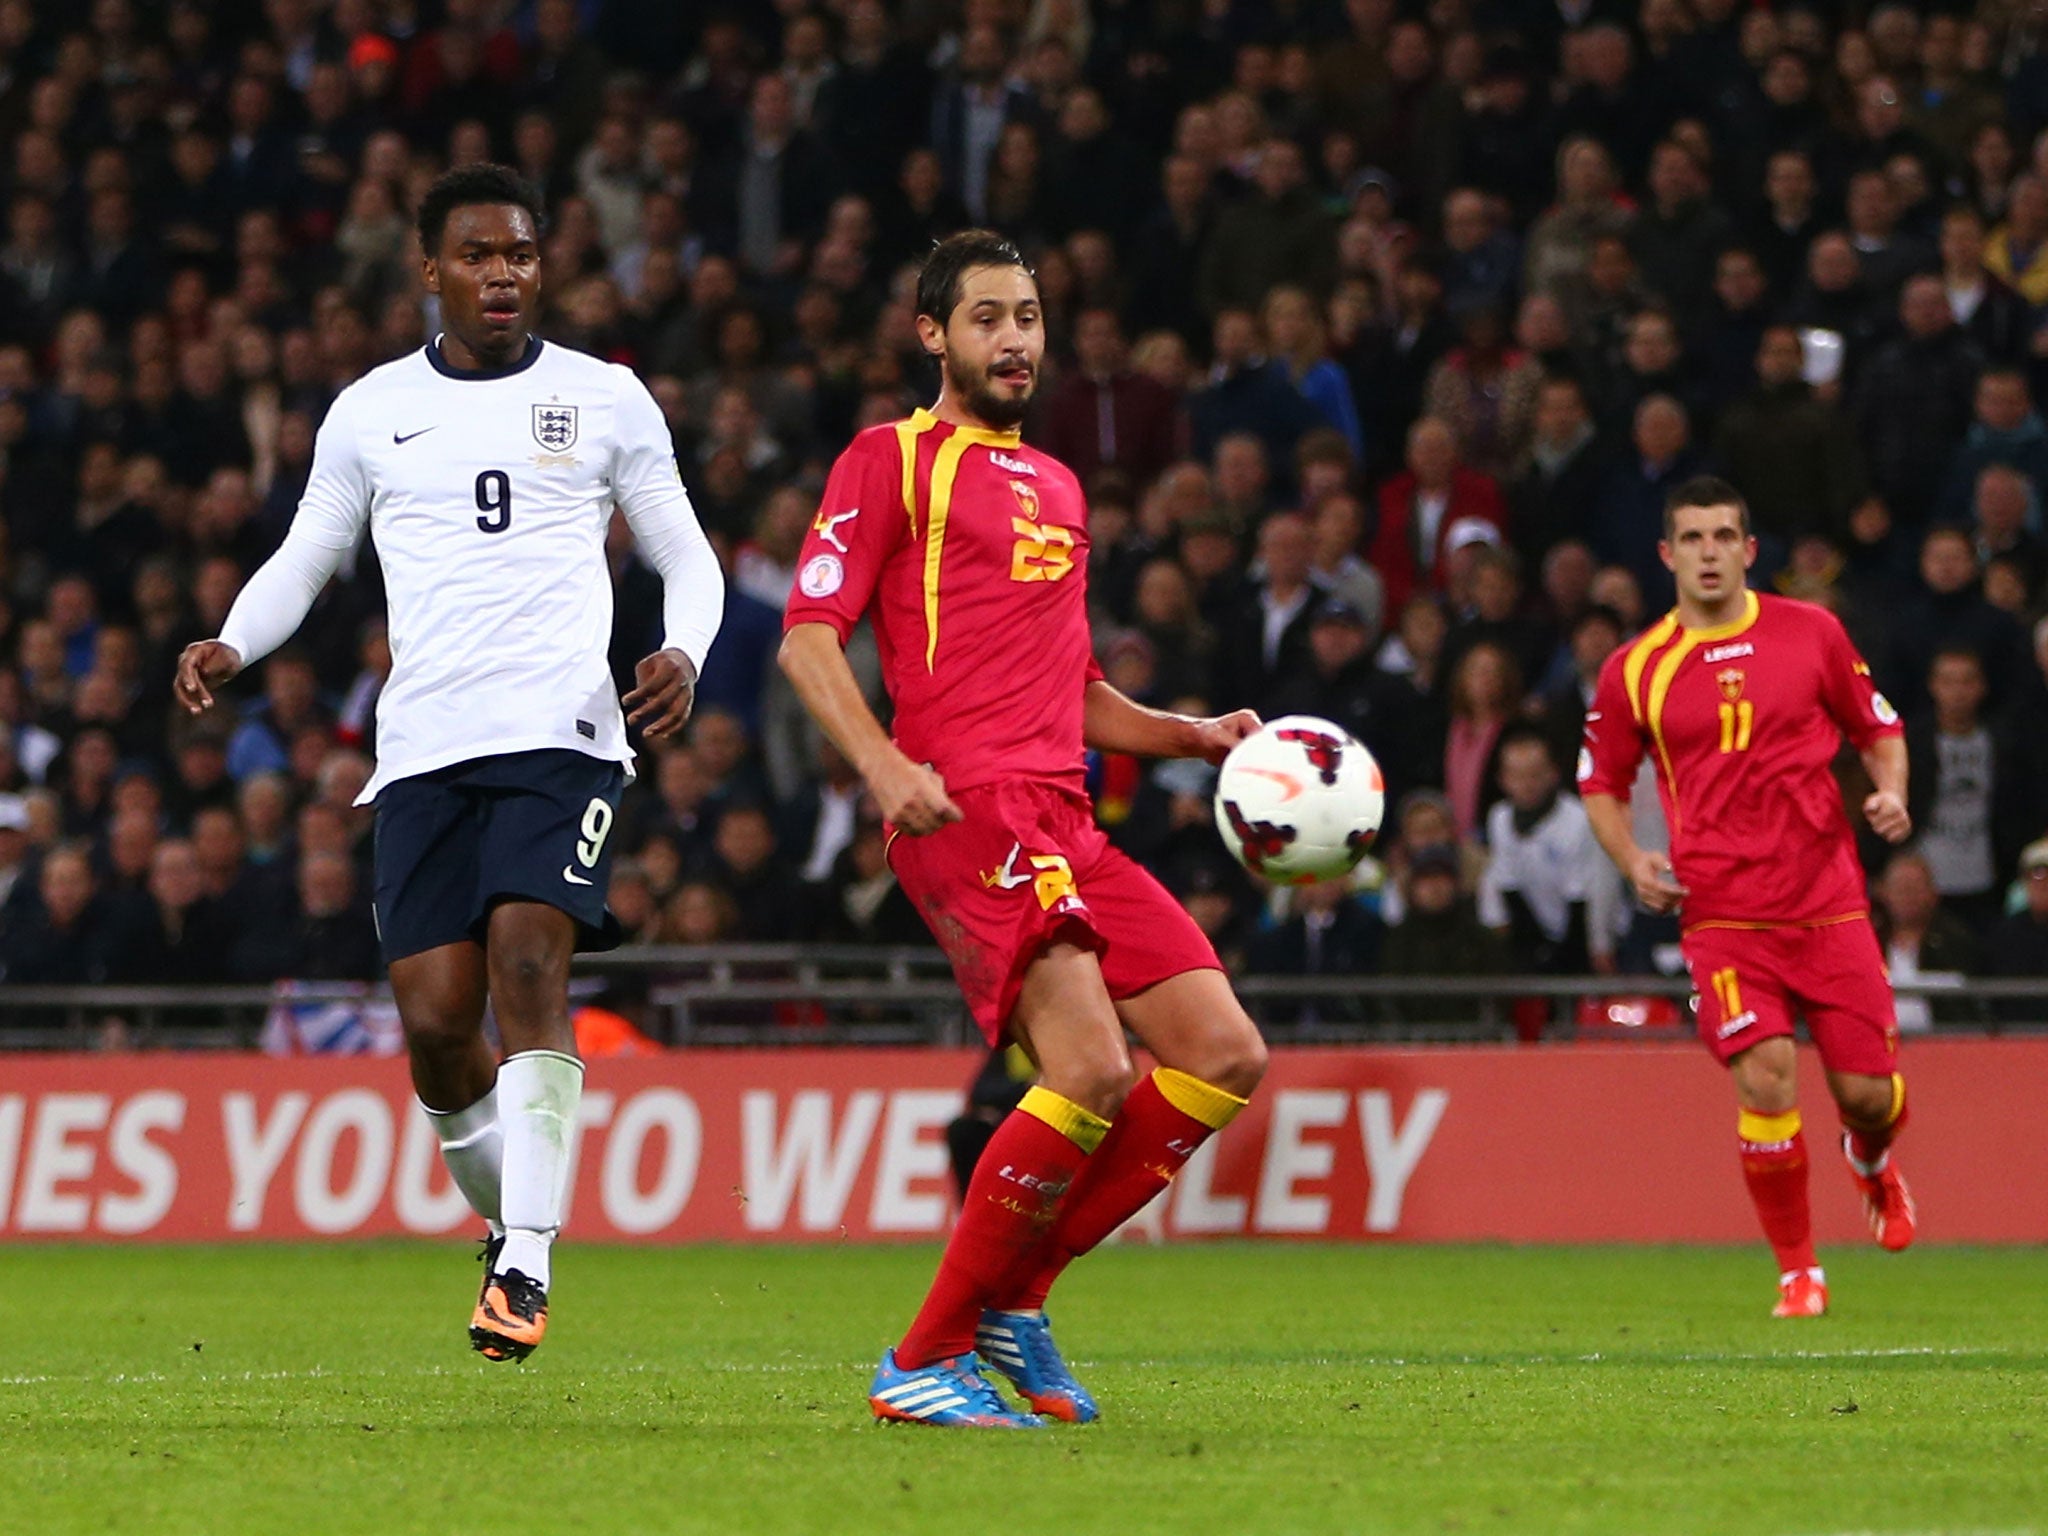 Daniel Sturridge looks on as Branko Boskovic of Montenegro scores an own goal during the FIFA 2014 World Cup Qualifying Group H match between England and Montenegro at Wembley Stadium on October 11, 2013 in London, England.